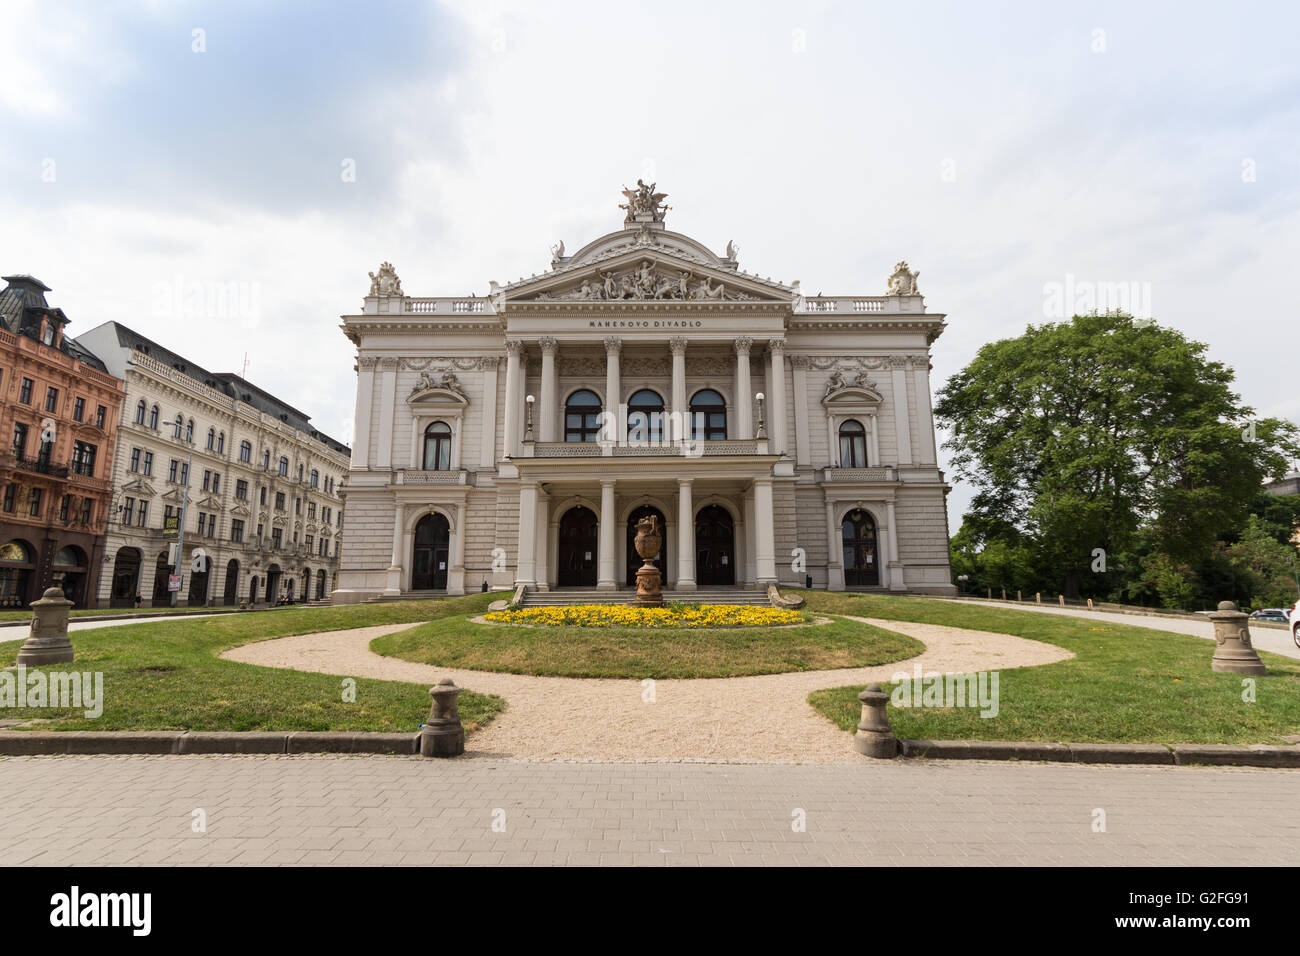 The front facade of the Mahen Theater in Brunn, Czech Republic. Stock Photo